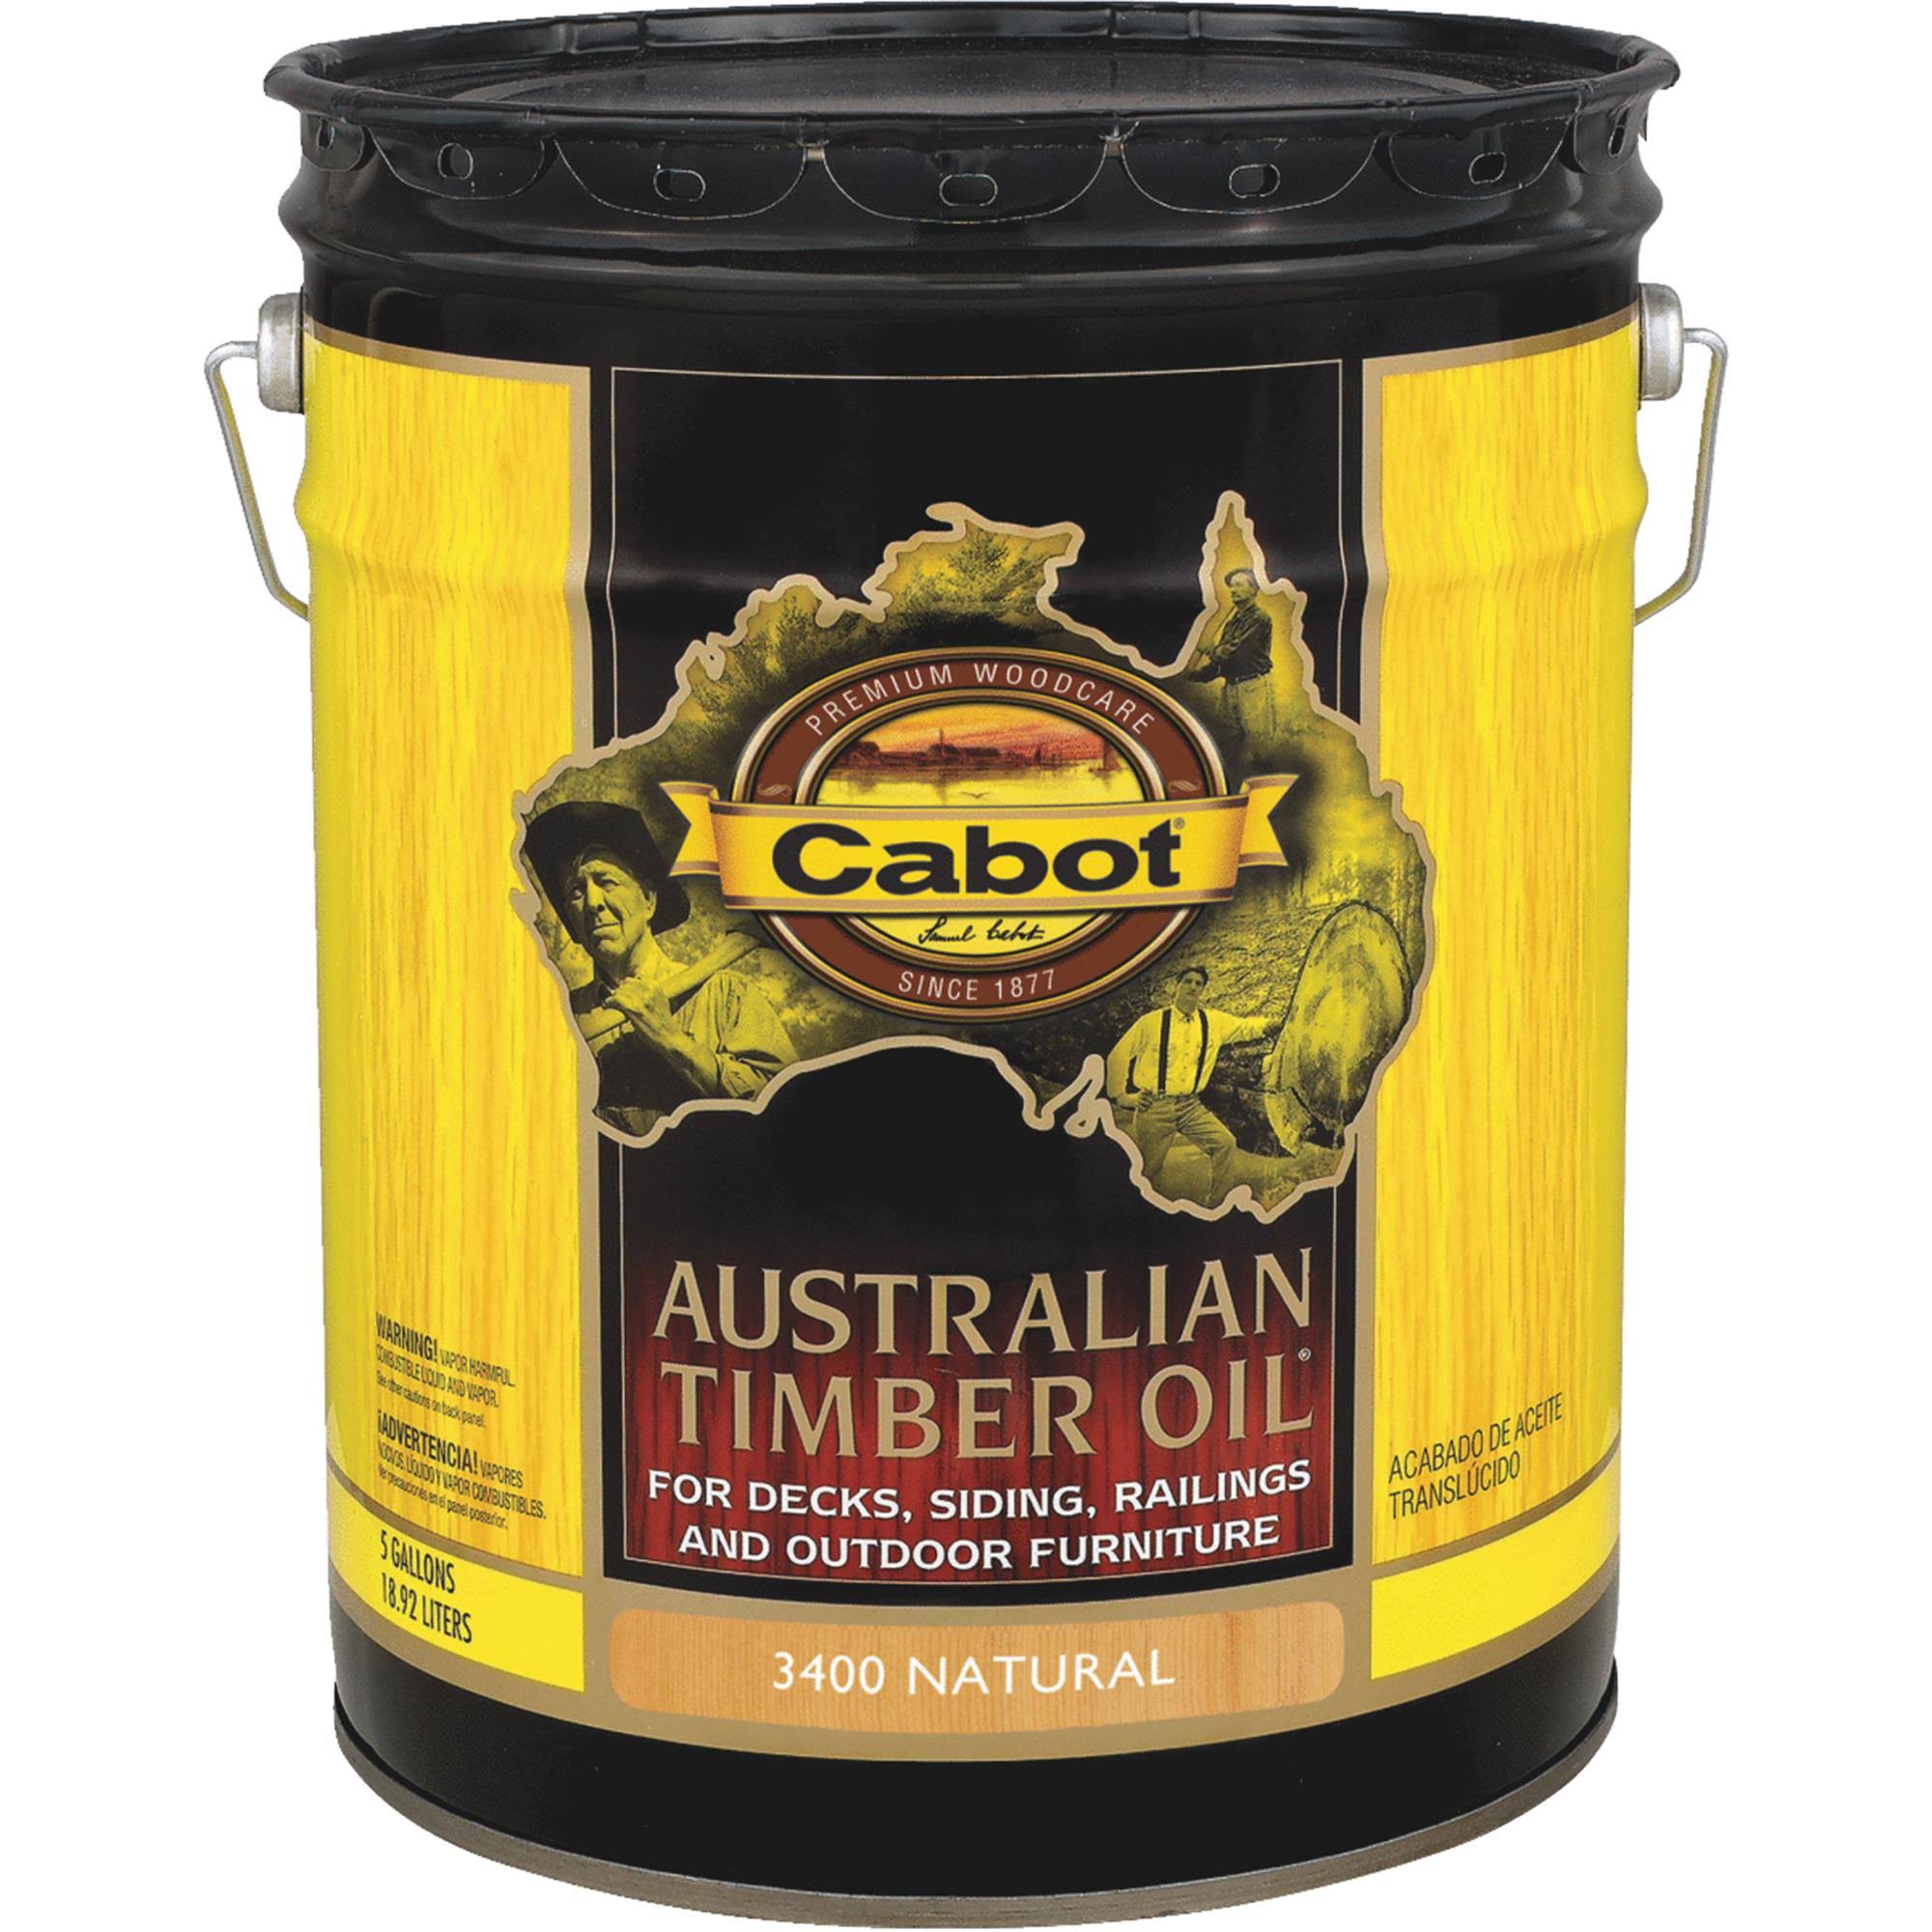 Cabot Australian Timber Oil Translucent Exterior Oil Finish | Garage | Free Shipping On All Orders | 30 Day Money Back Guarantee